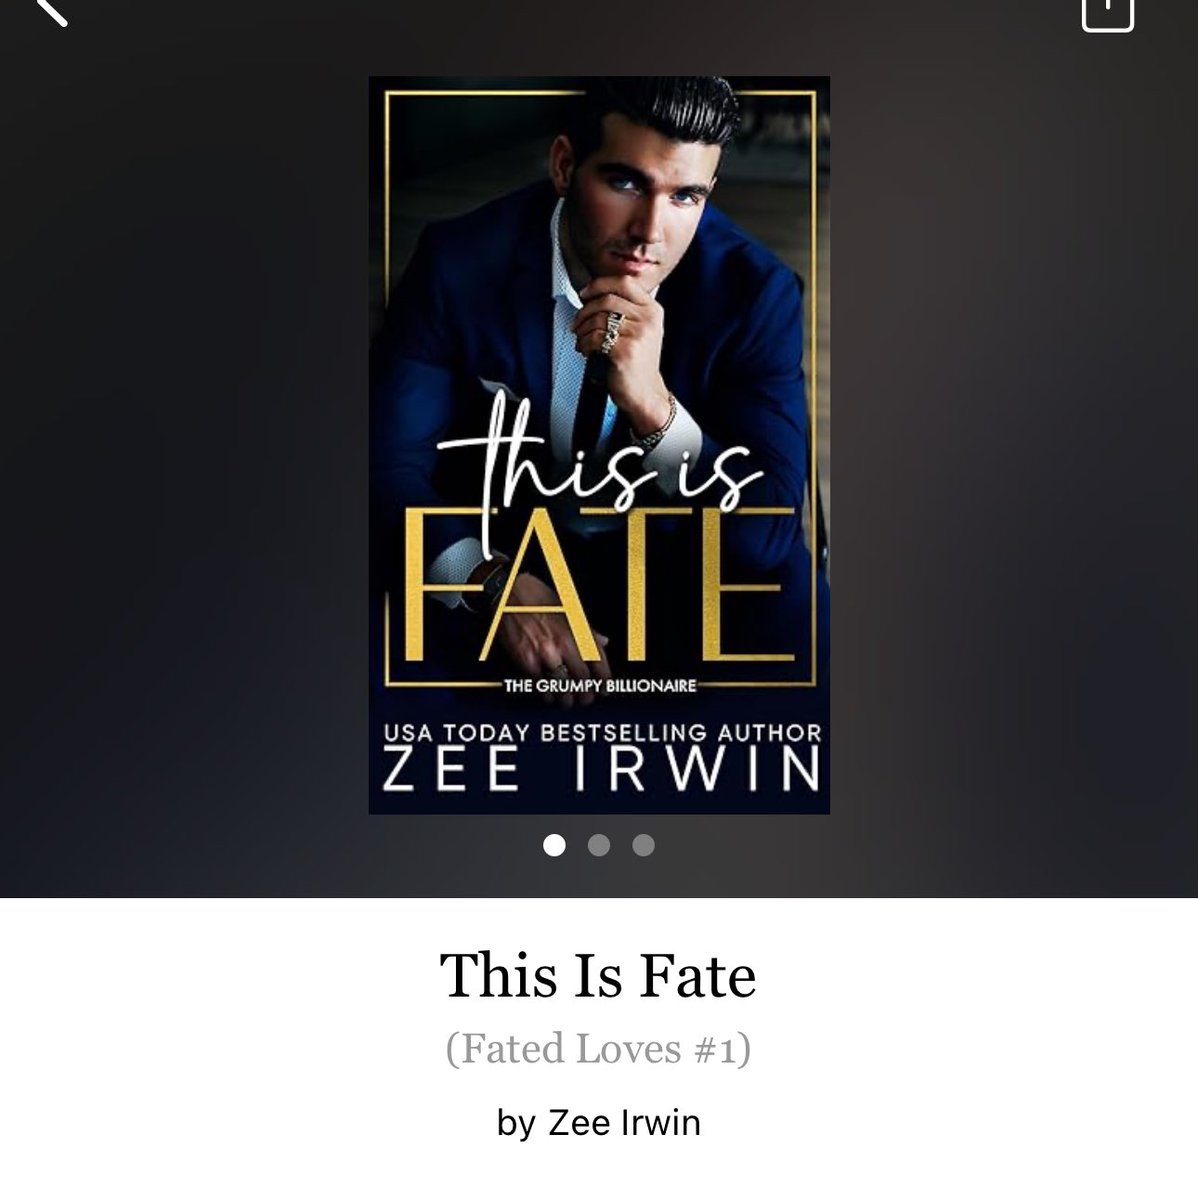 This is Fate by Zee Irwin 

#ThisIsFate by #ZeeIrwin #6056 #24chapters #174pages #205of400 #Series #Audiobook #2houraudiobook #FatedLoveSeries #MaddieAndDaniel #Book1of5 #february2024 #clearingoffreadingshelves #whatsnext #readitquick